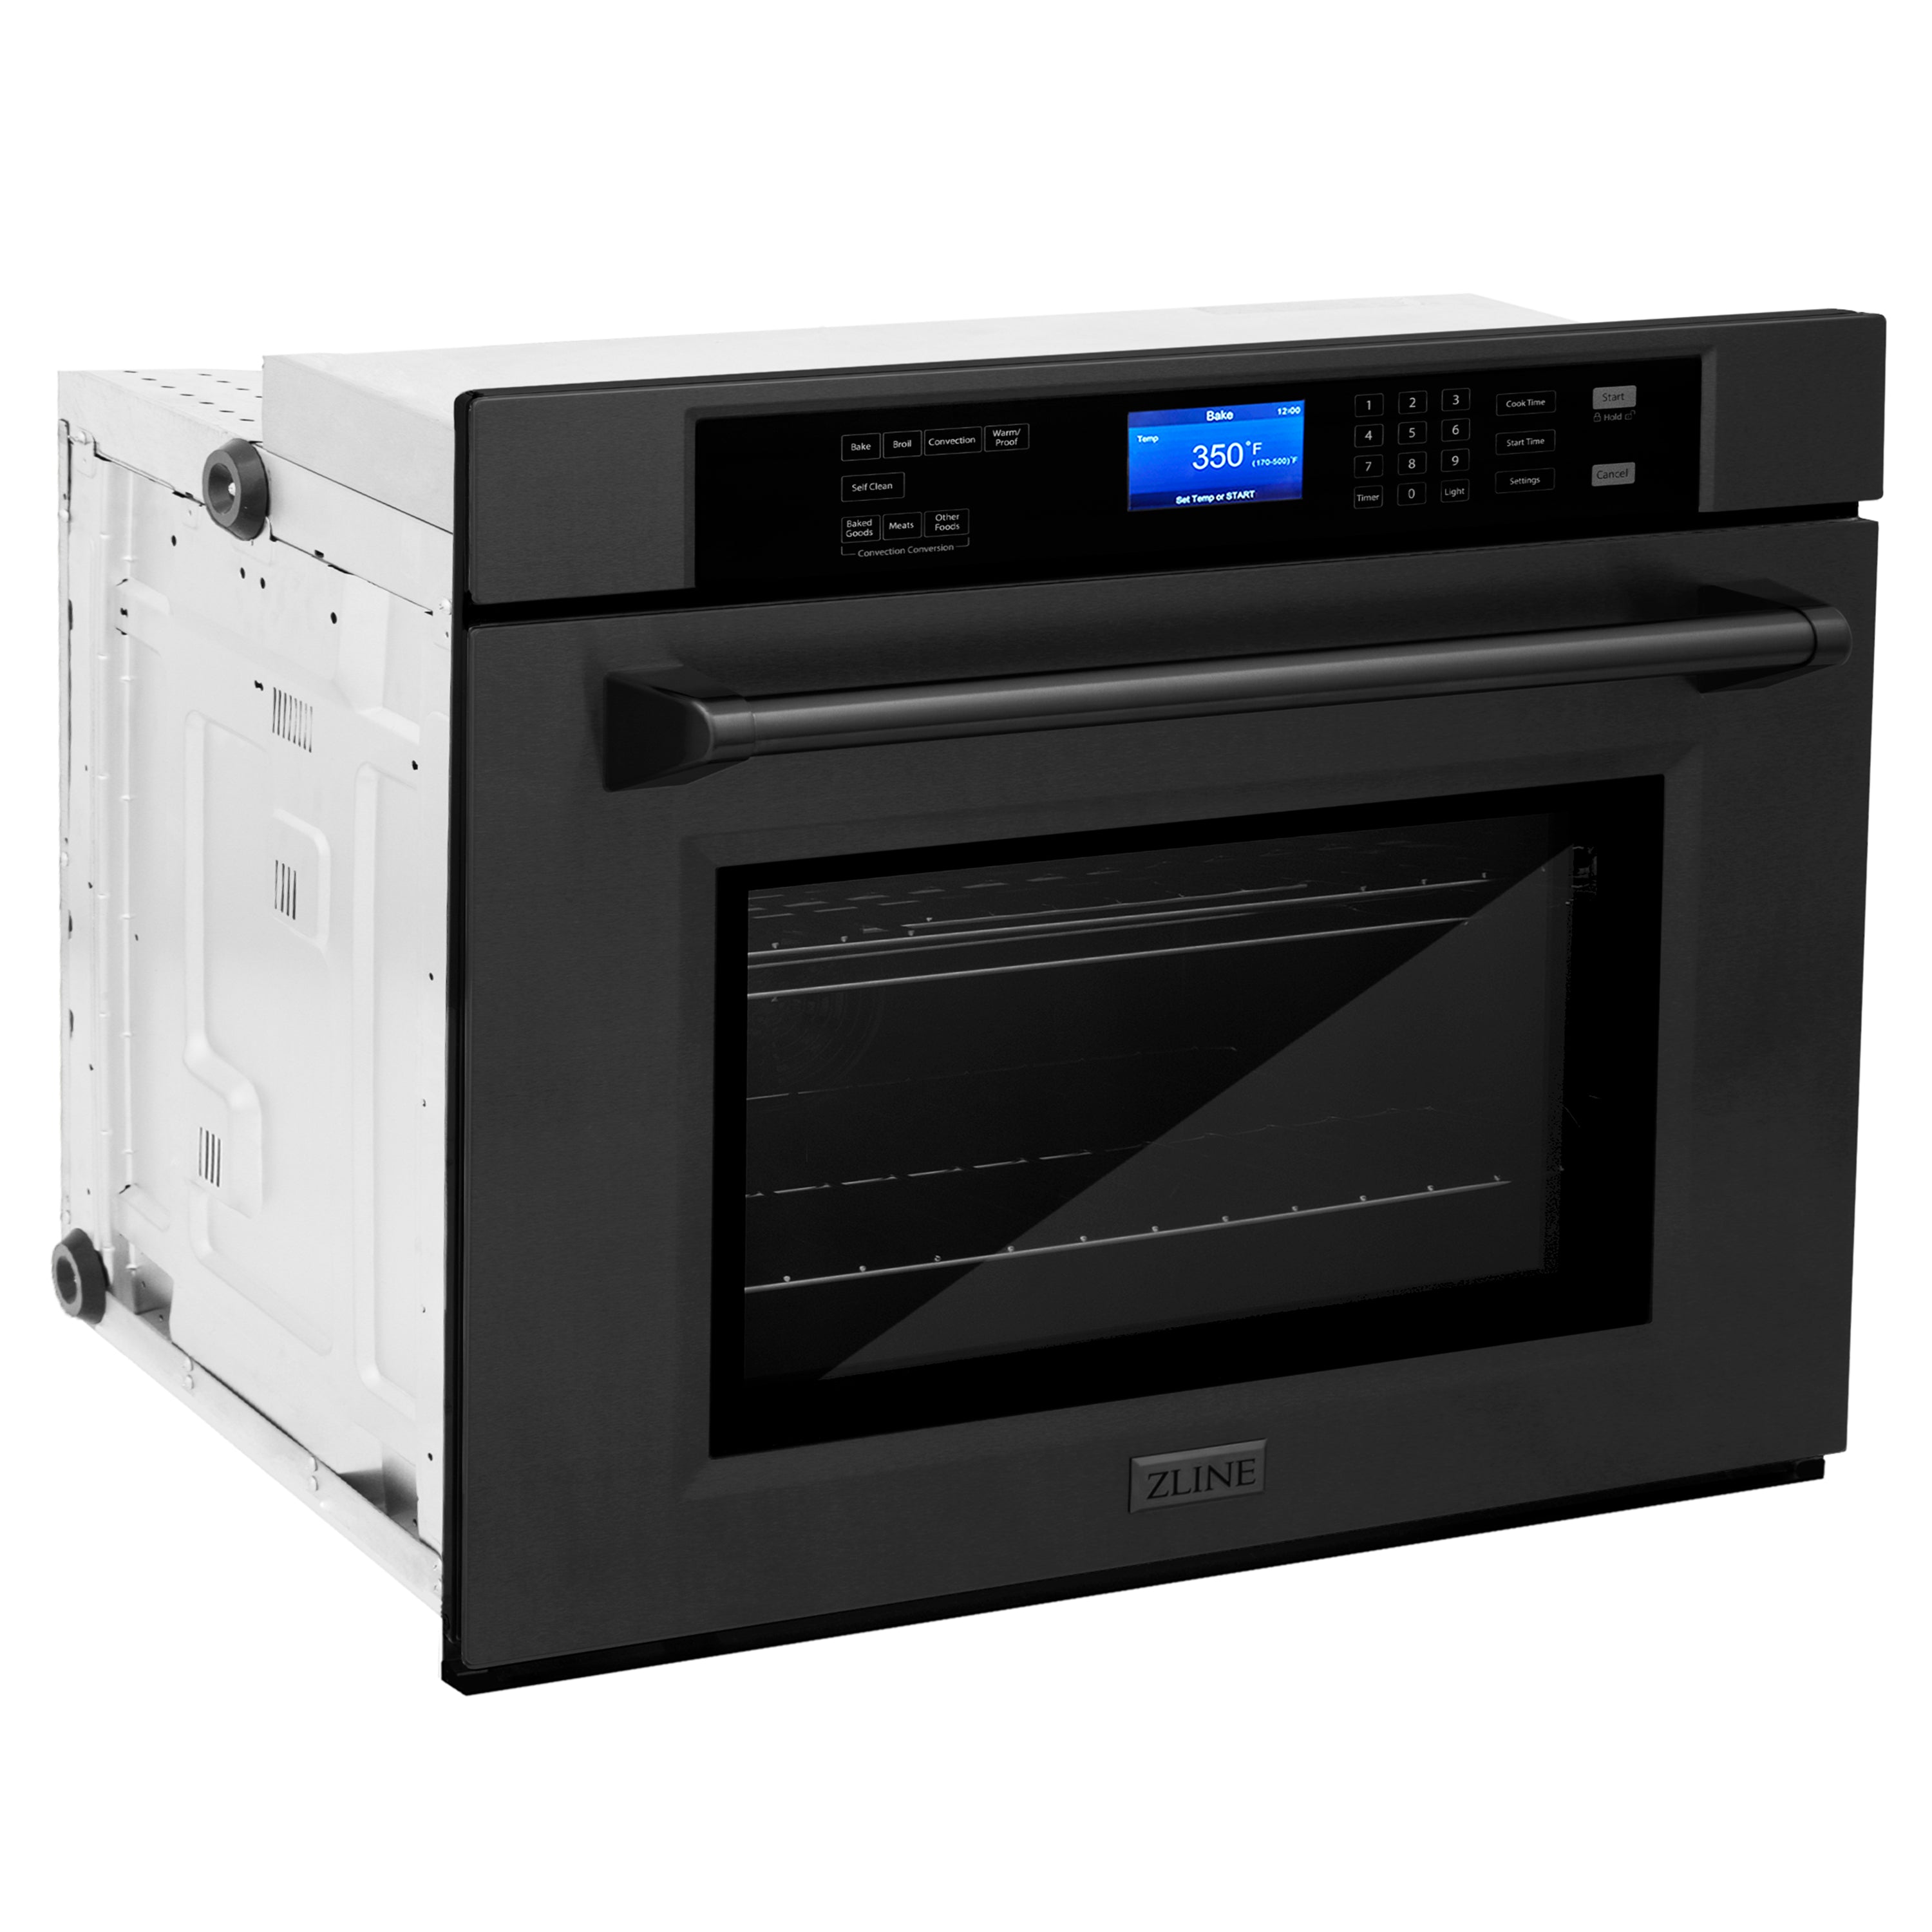 ZLINE 30" Professional Single Wall Oven with Self Clean and True Convection in Stainless Steel (AWS-30) - New Star Living